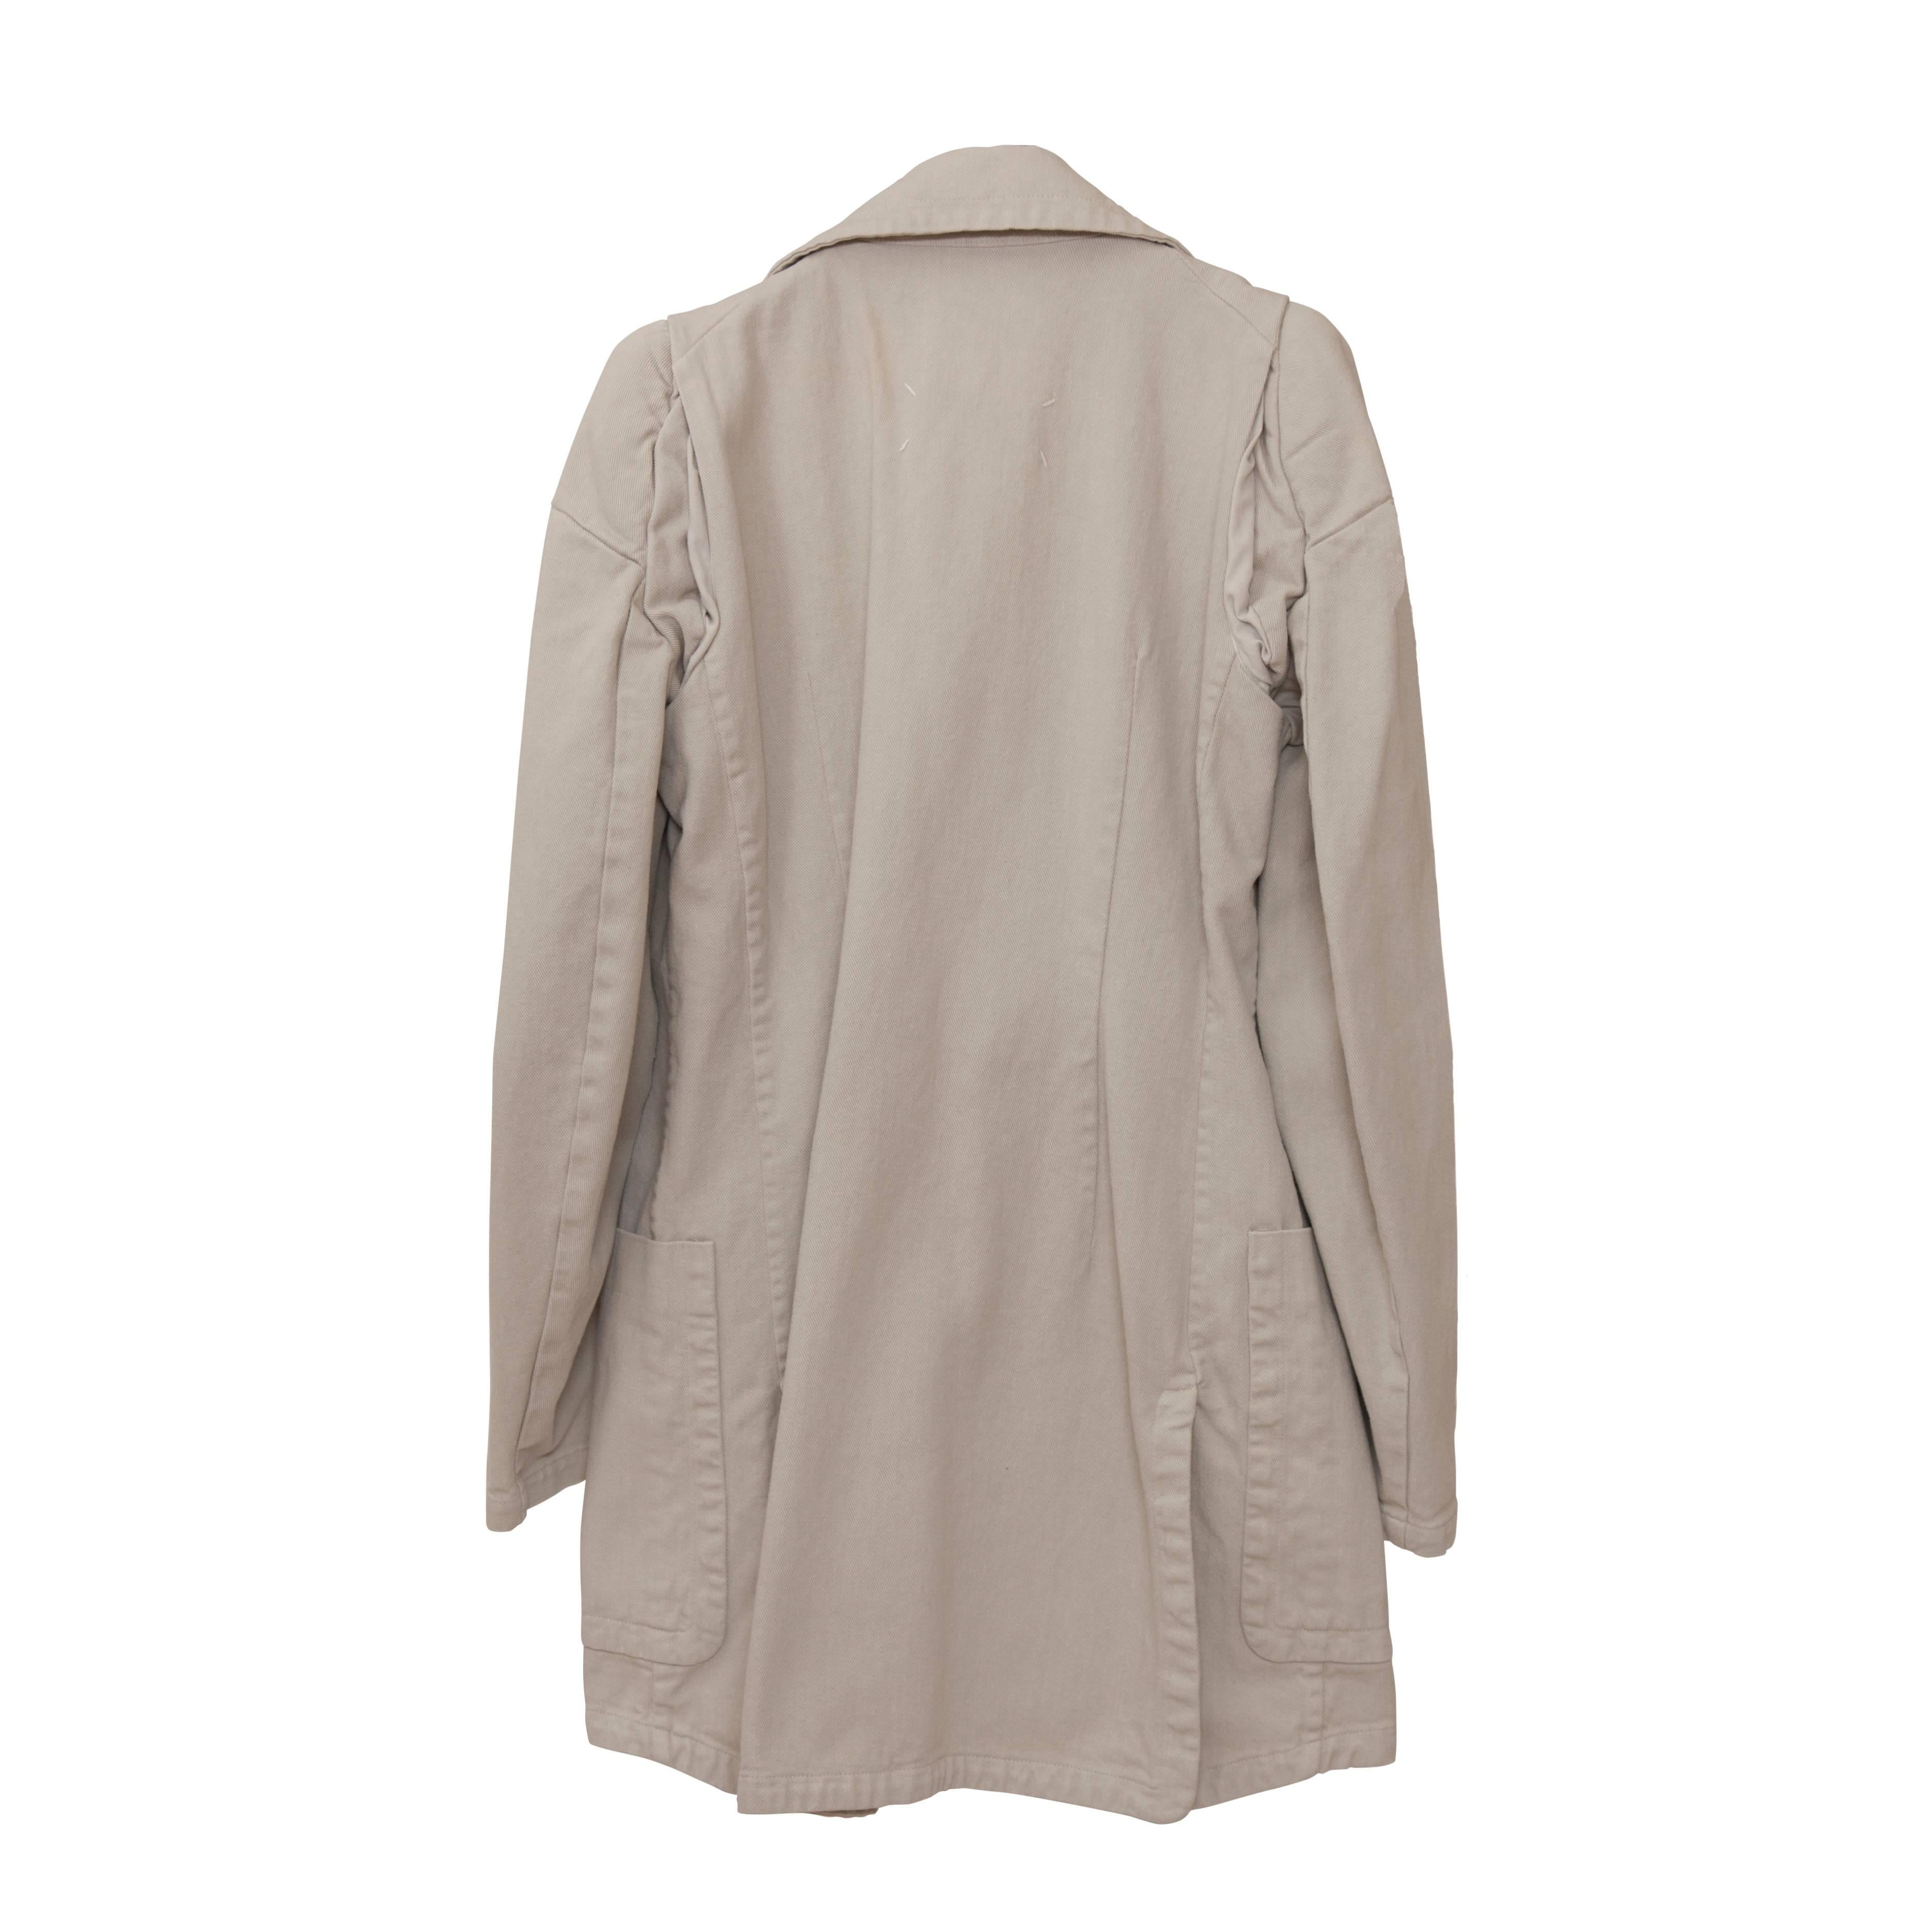 Maison Martin Margiela one of a kind jacket coat. Actual show piece from collection 1989 / AW 1994.
With exposed dart detail on front.

Highly collective.
Measurements : 
shoulders : 35:cm
sleeves : 65 cm
underarm : 52cm
length : 80cm